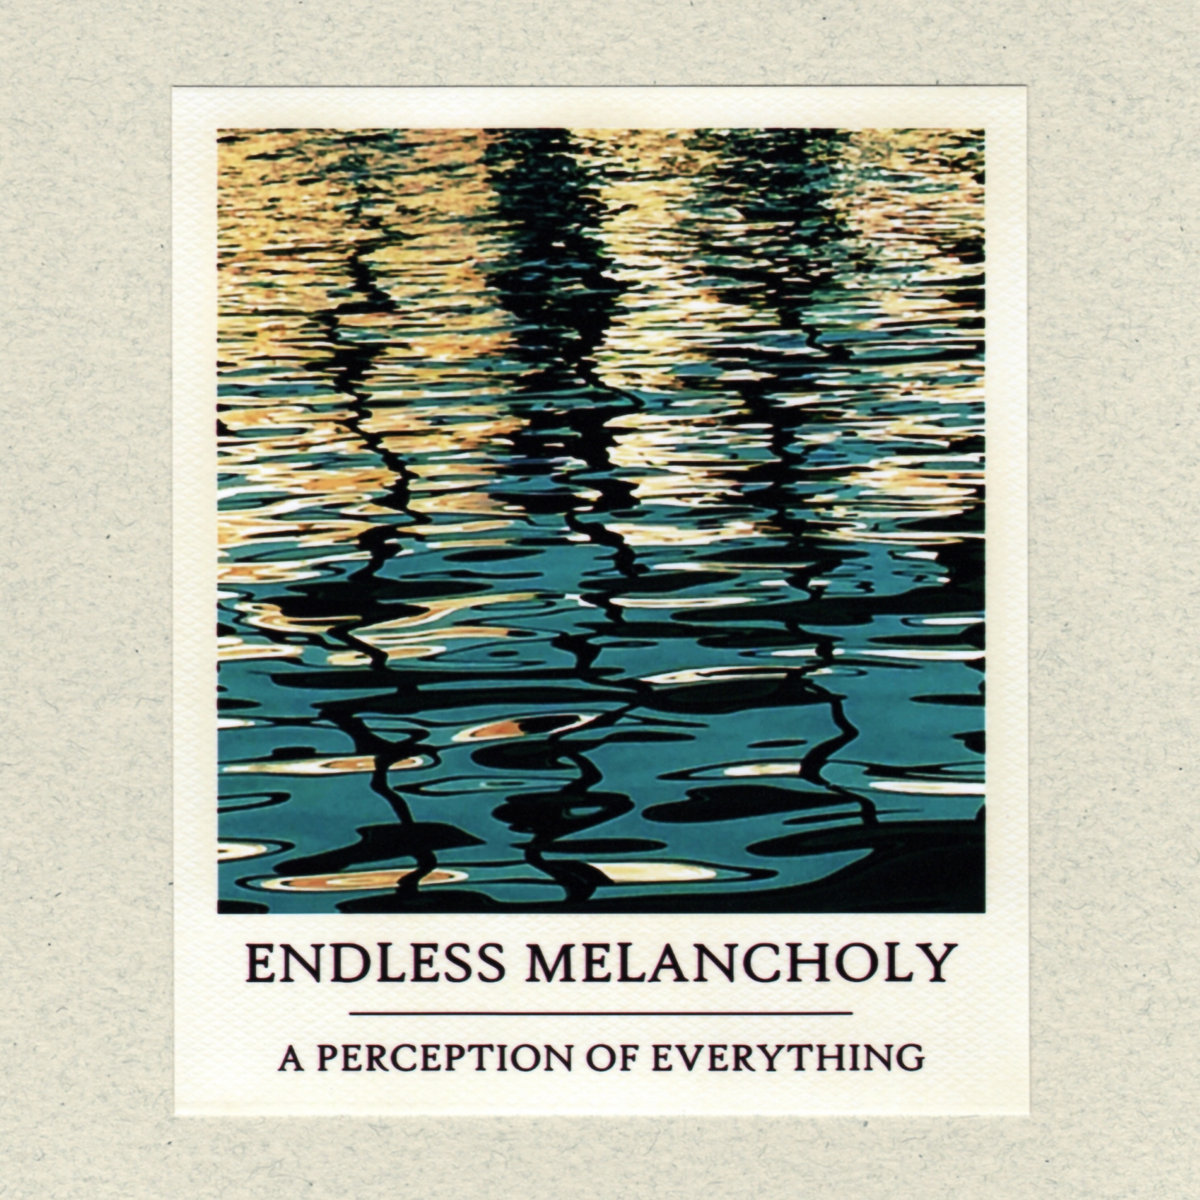 Today I'm listening to: Endless Melancholy - A Perception Of Everything via  @soundinsilence_Wonderful, cinematic ambient album. For fans of Loscil, Logic Moon and Warmth. Favorite track: The Edge https://soundinsilencerecords.bandcamp.com/album/a-perception-of-everything